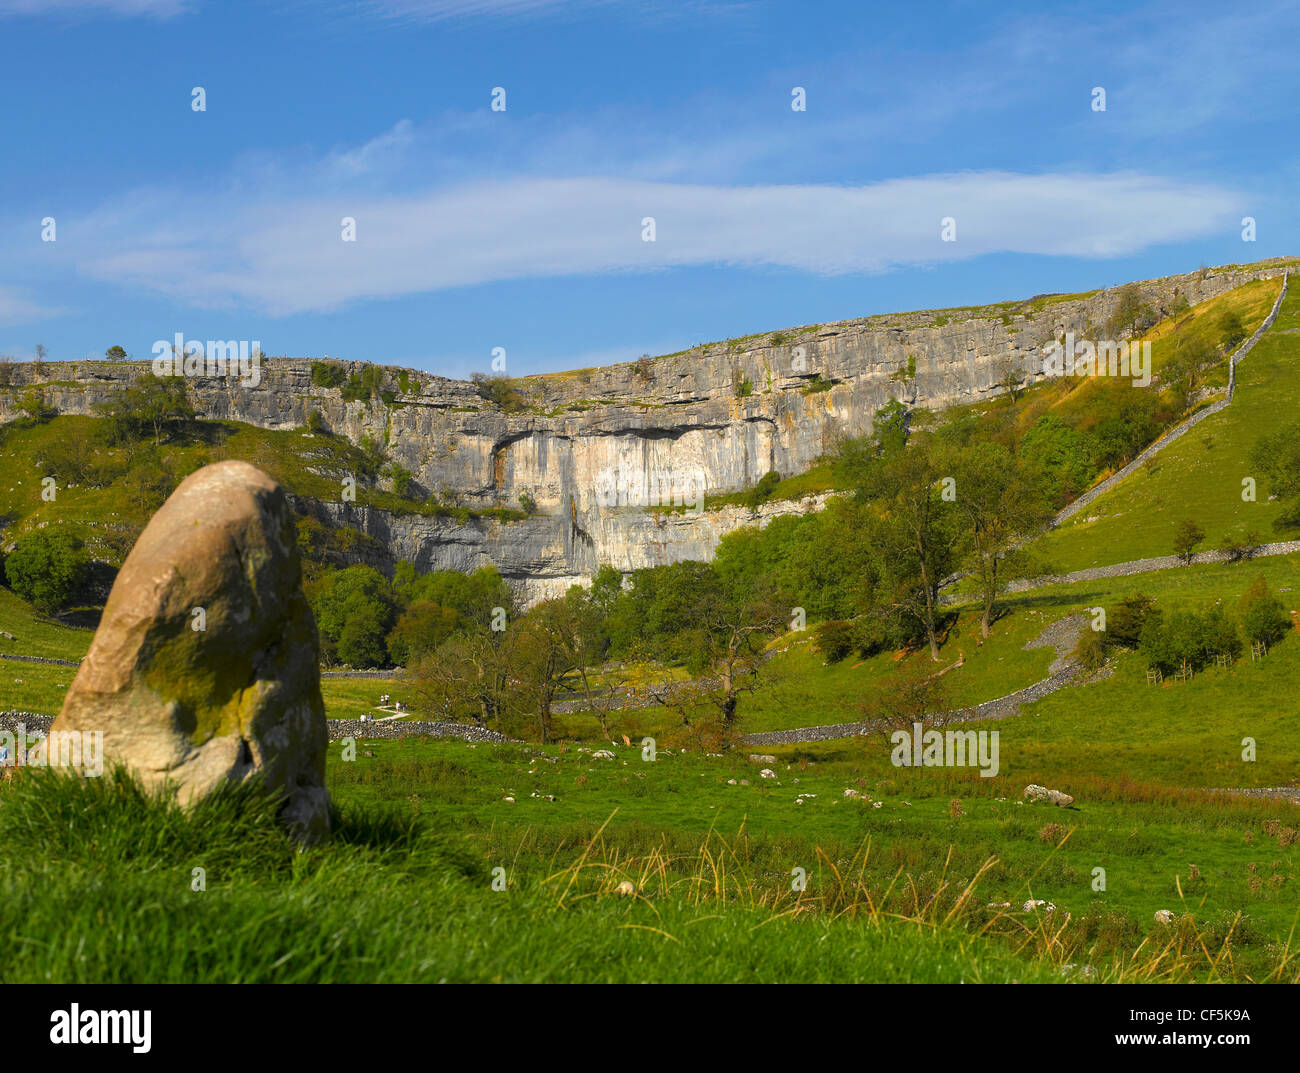 People exploring Malham Cove, an 80 metre high limestone crag formed after the last ice age. Stock Photo